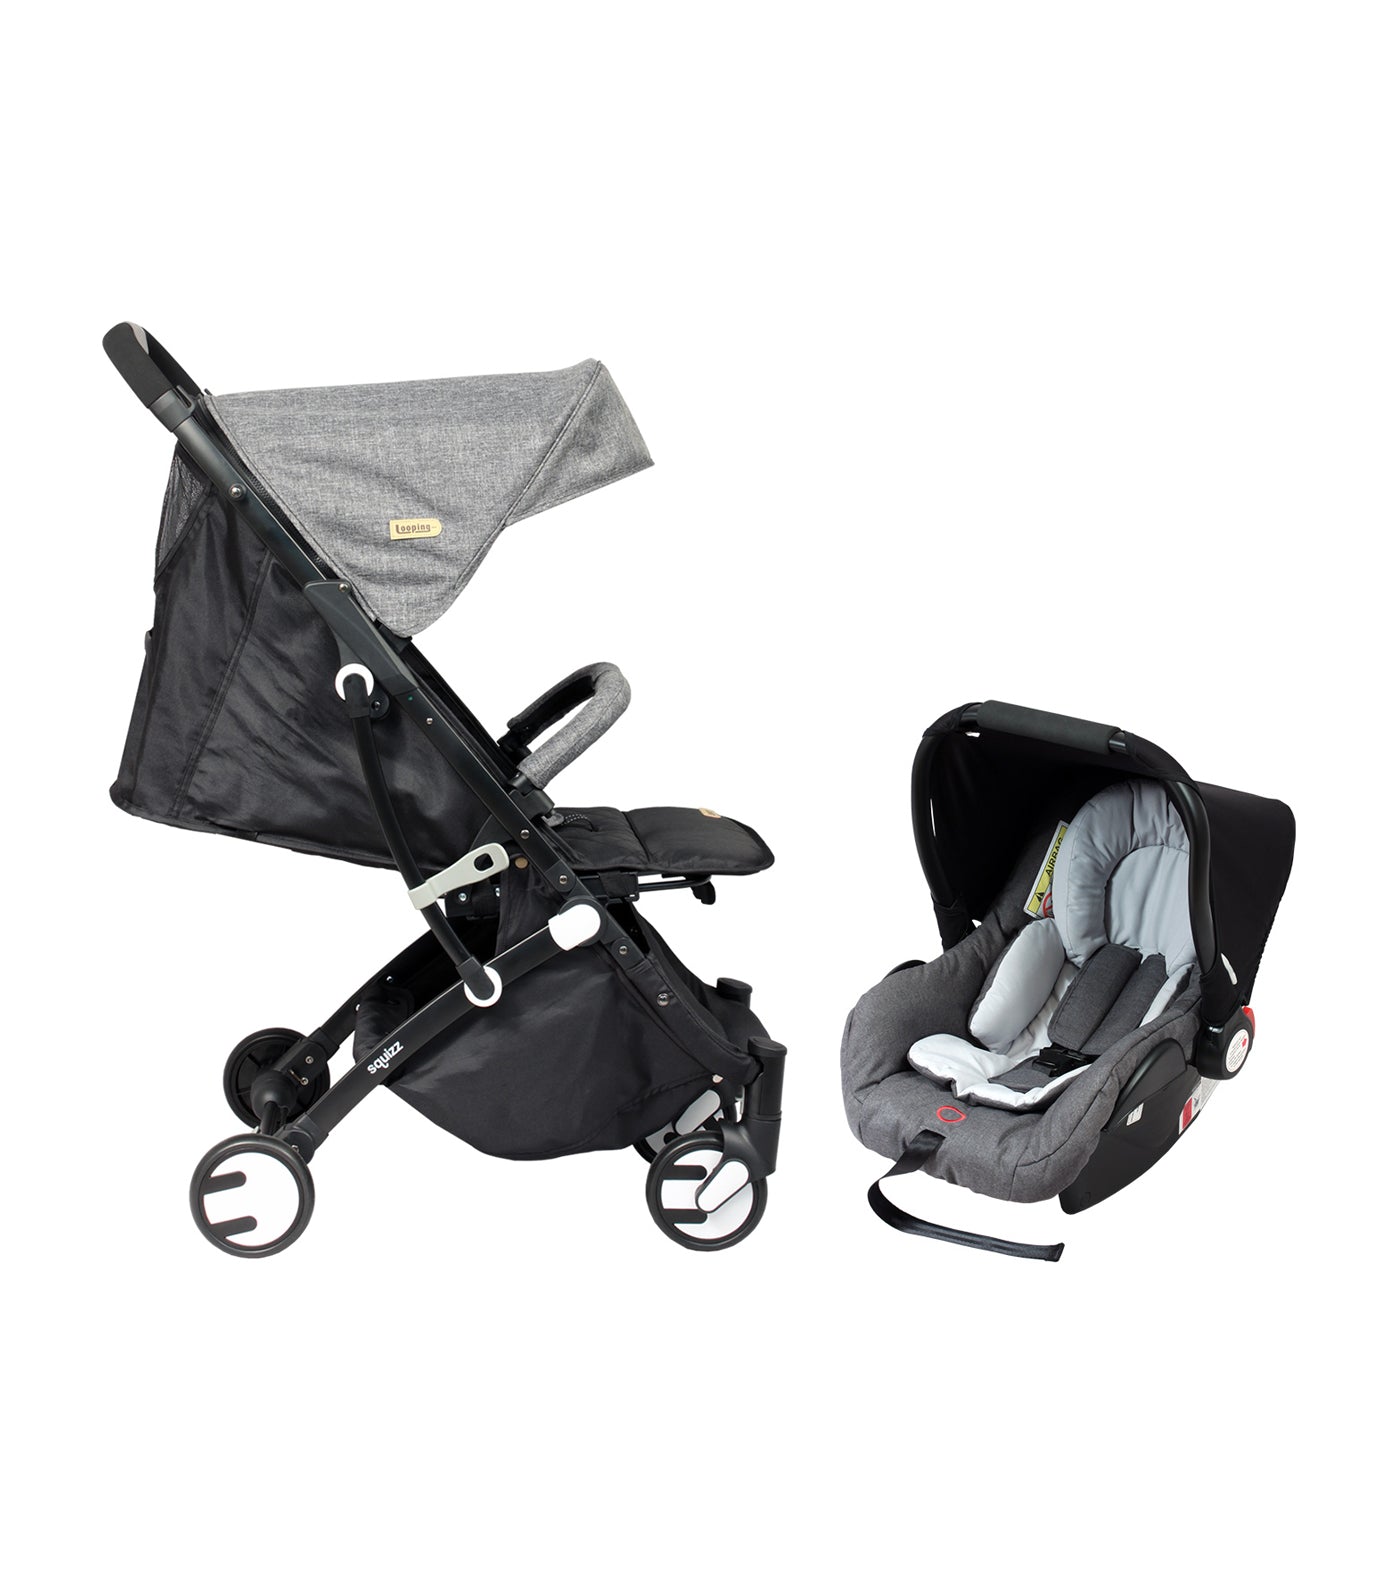 looping gray canopy-black frame squizz 3 stroller with car seat (travel system)